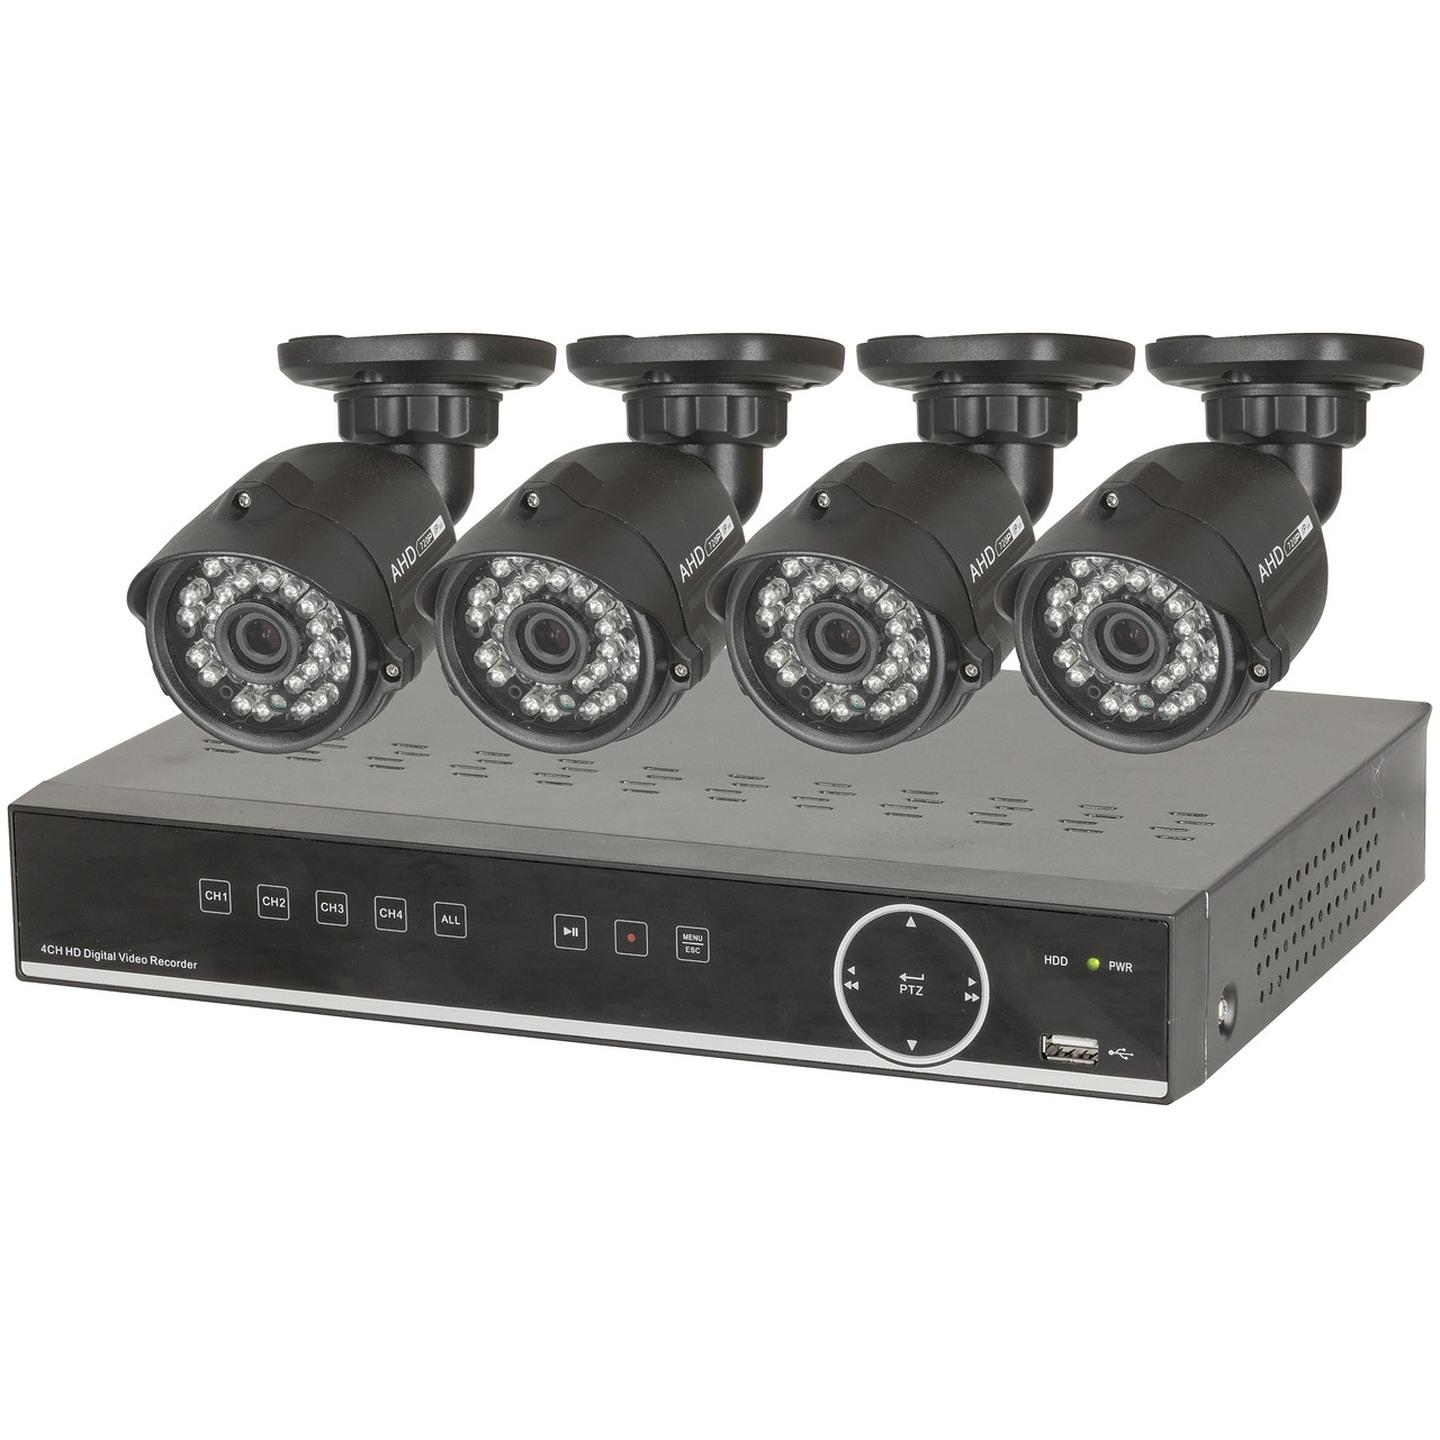 Network 16 Channel AHD DVR with 4 x 720p Cameras